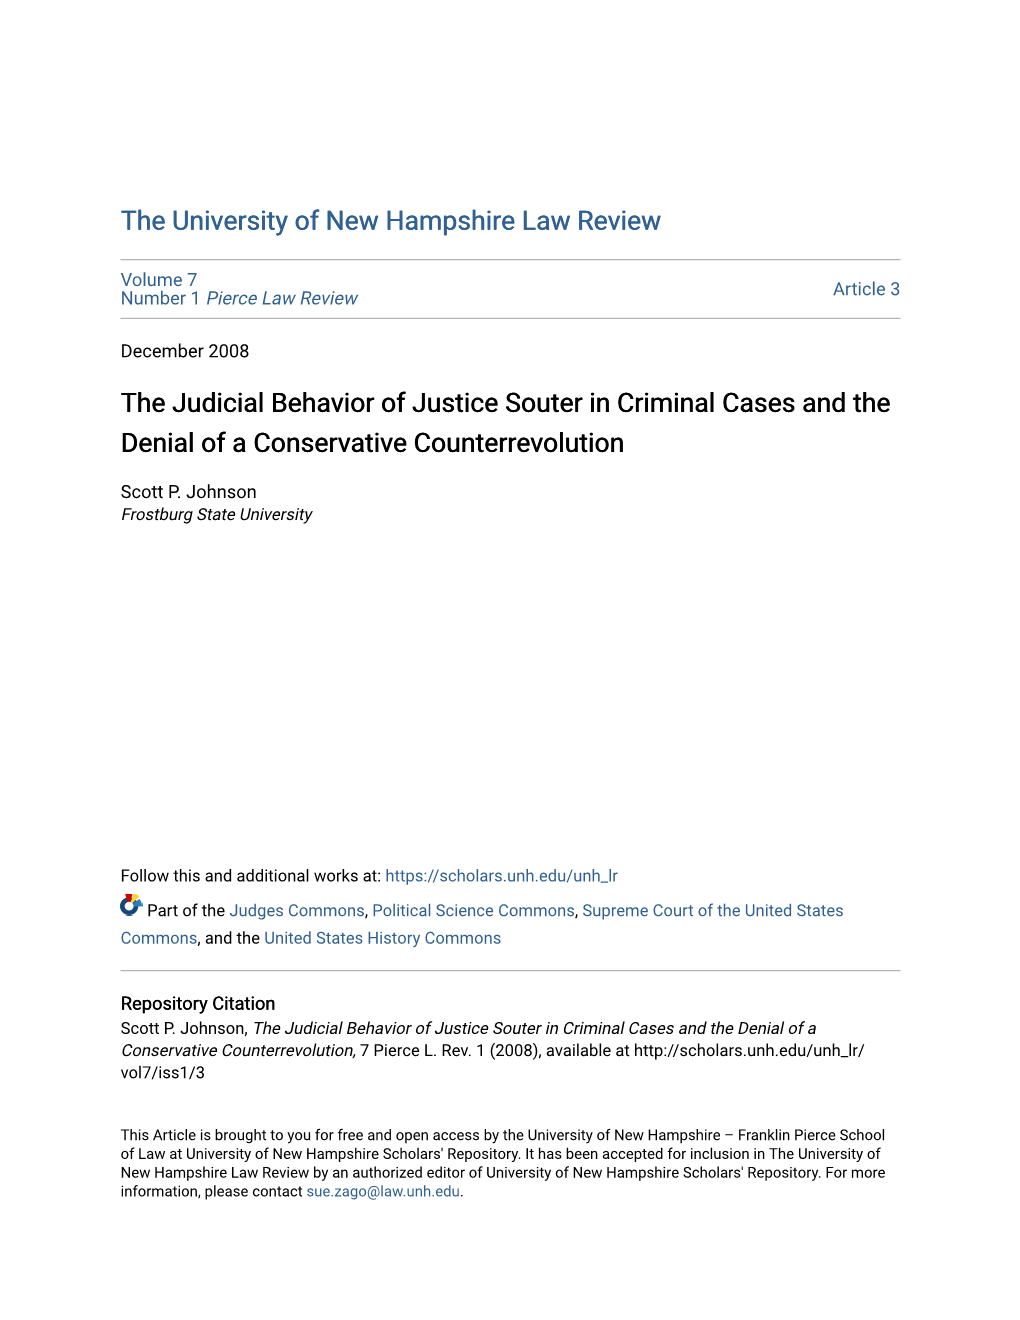 The Judicial Behavior of Justice Souter in Criminal Cases and the Denial of a Conservative Counterrevolution